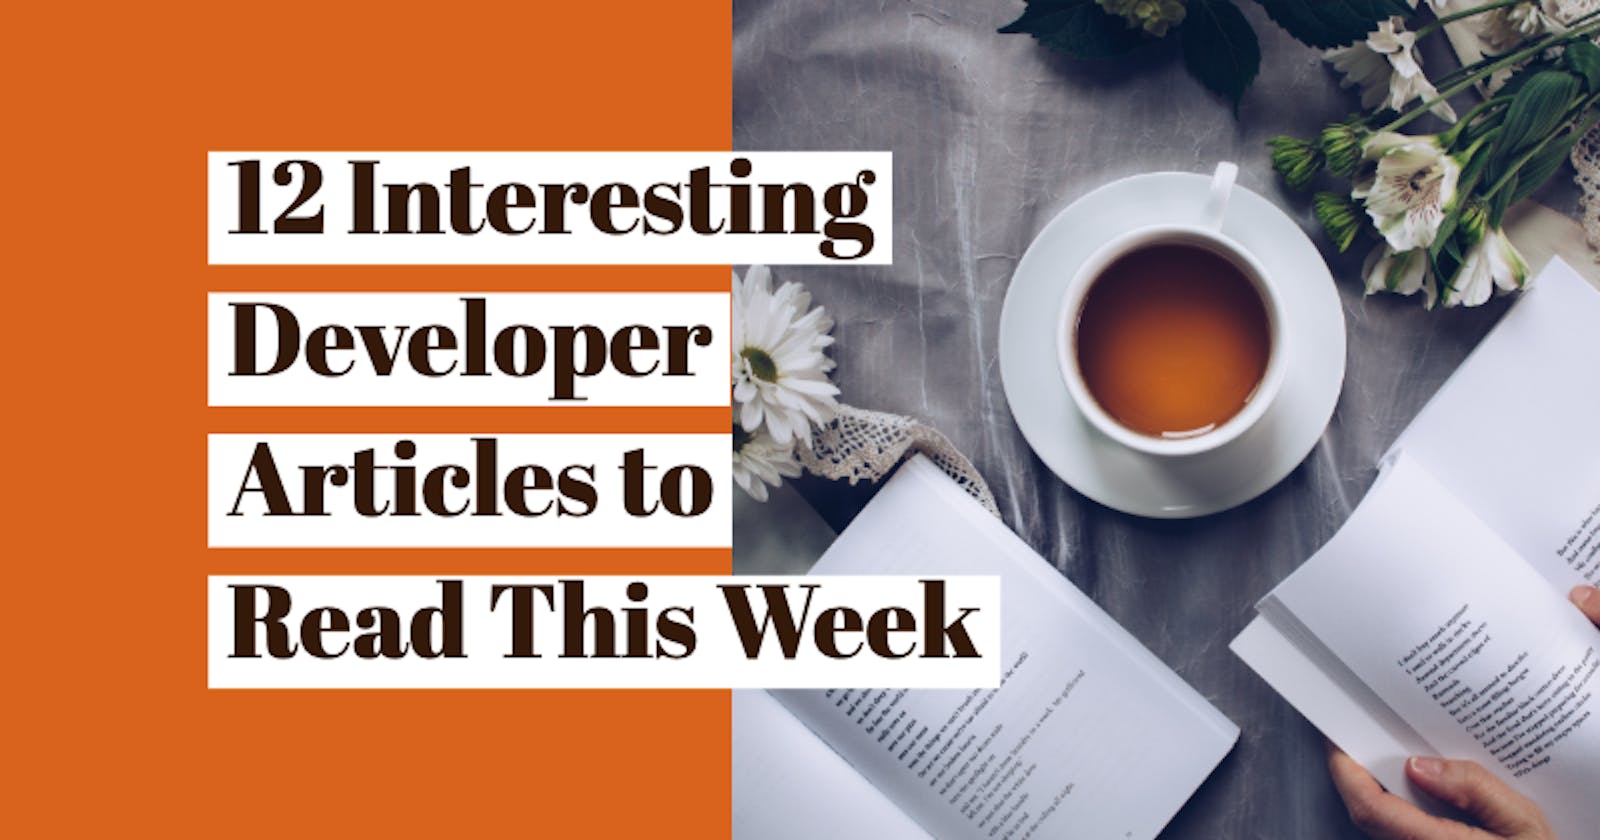 12 Interesting Developer Articles to Read This Week